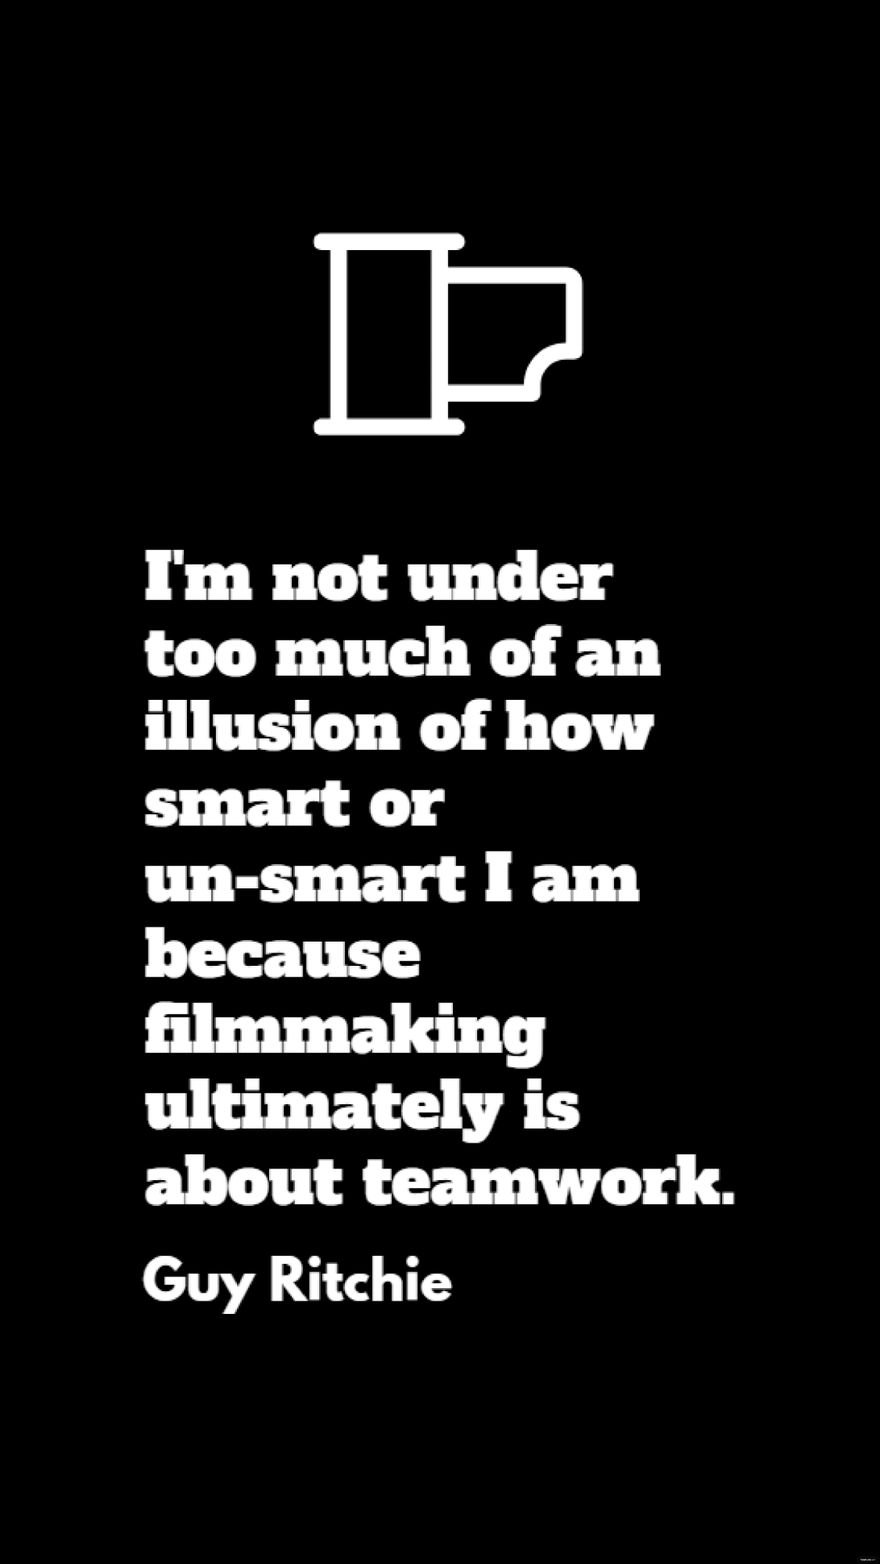 Free Guy Ritchie - I'm not under too much of an illusion of how smart or un-smart I am because filmmaking ultimately is about teamwork.